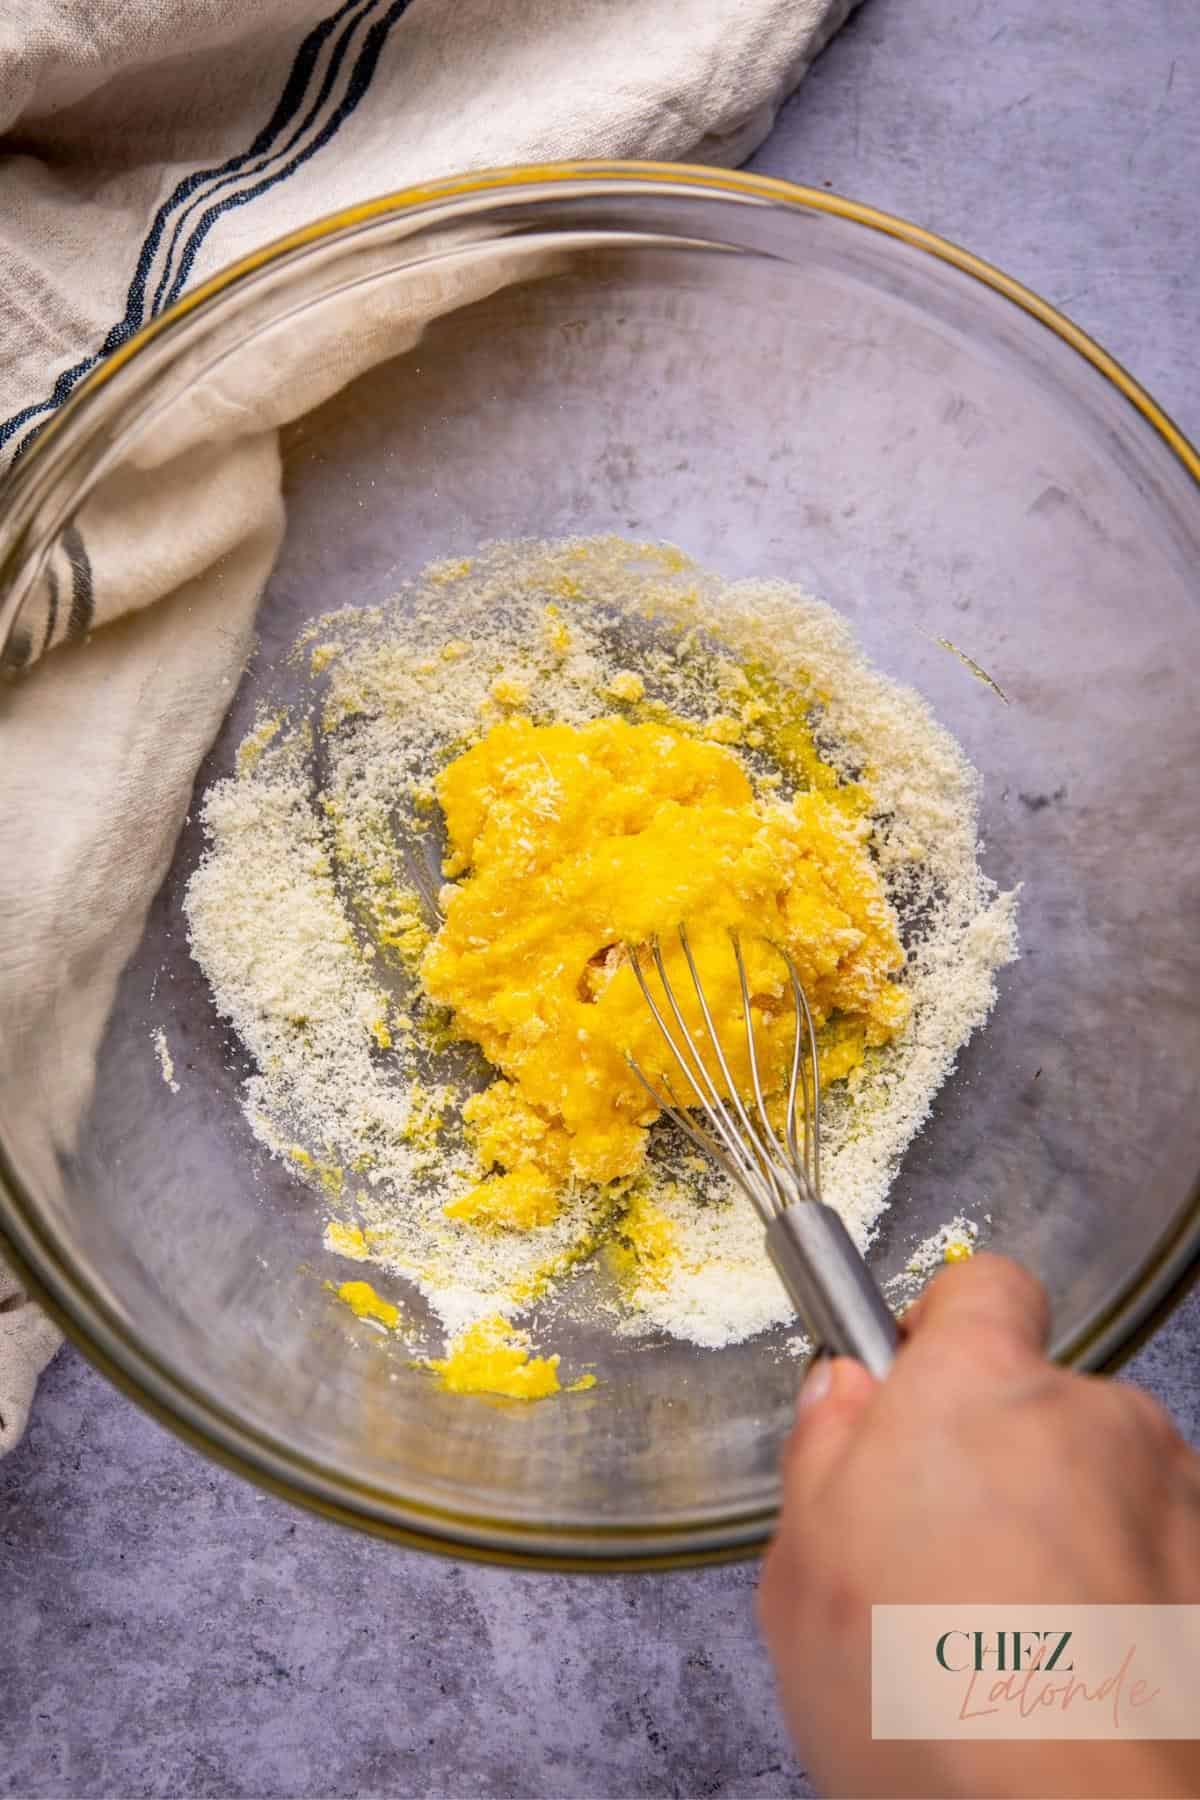 Mixing egg yolk and cheese paste for carbonara paste.